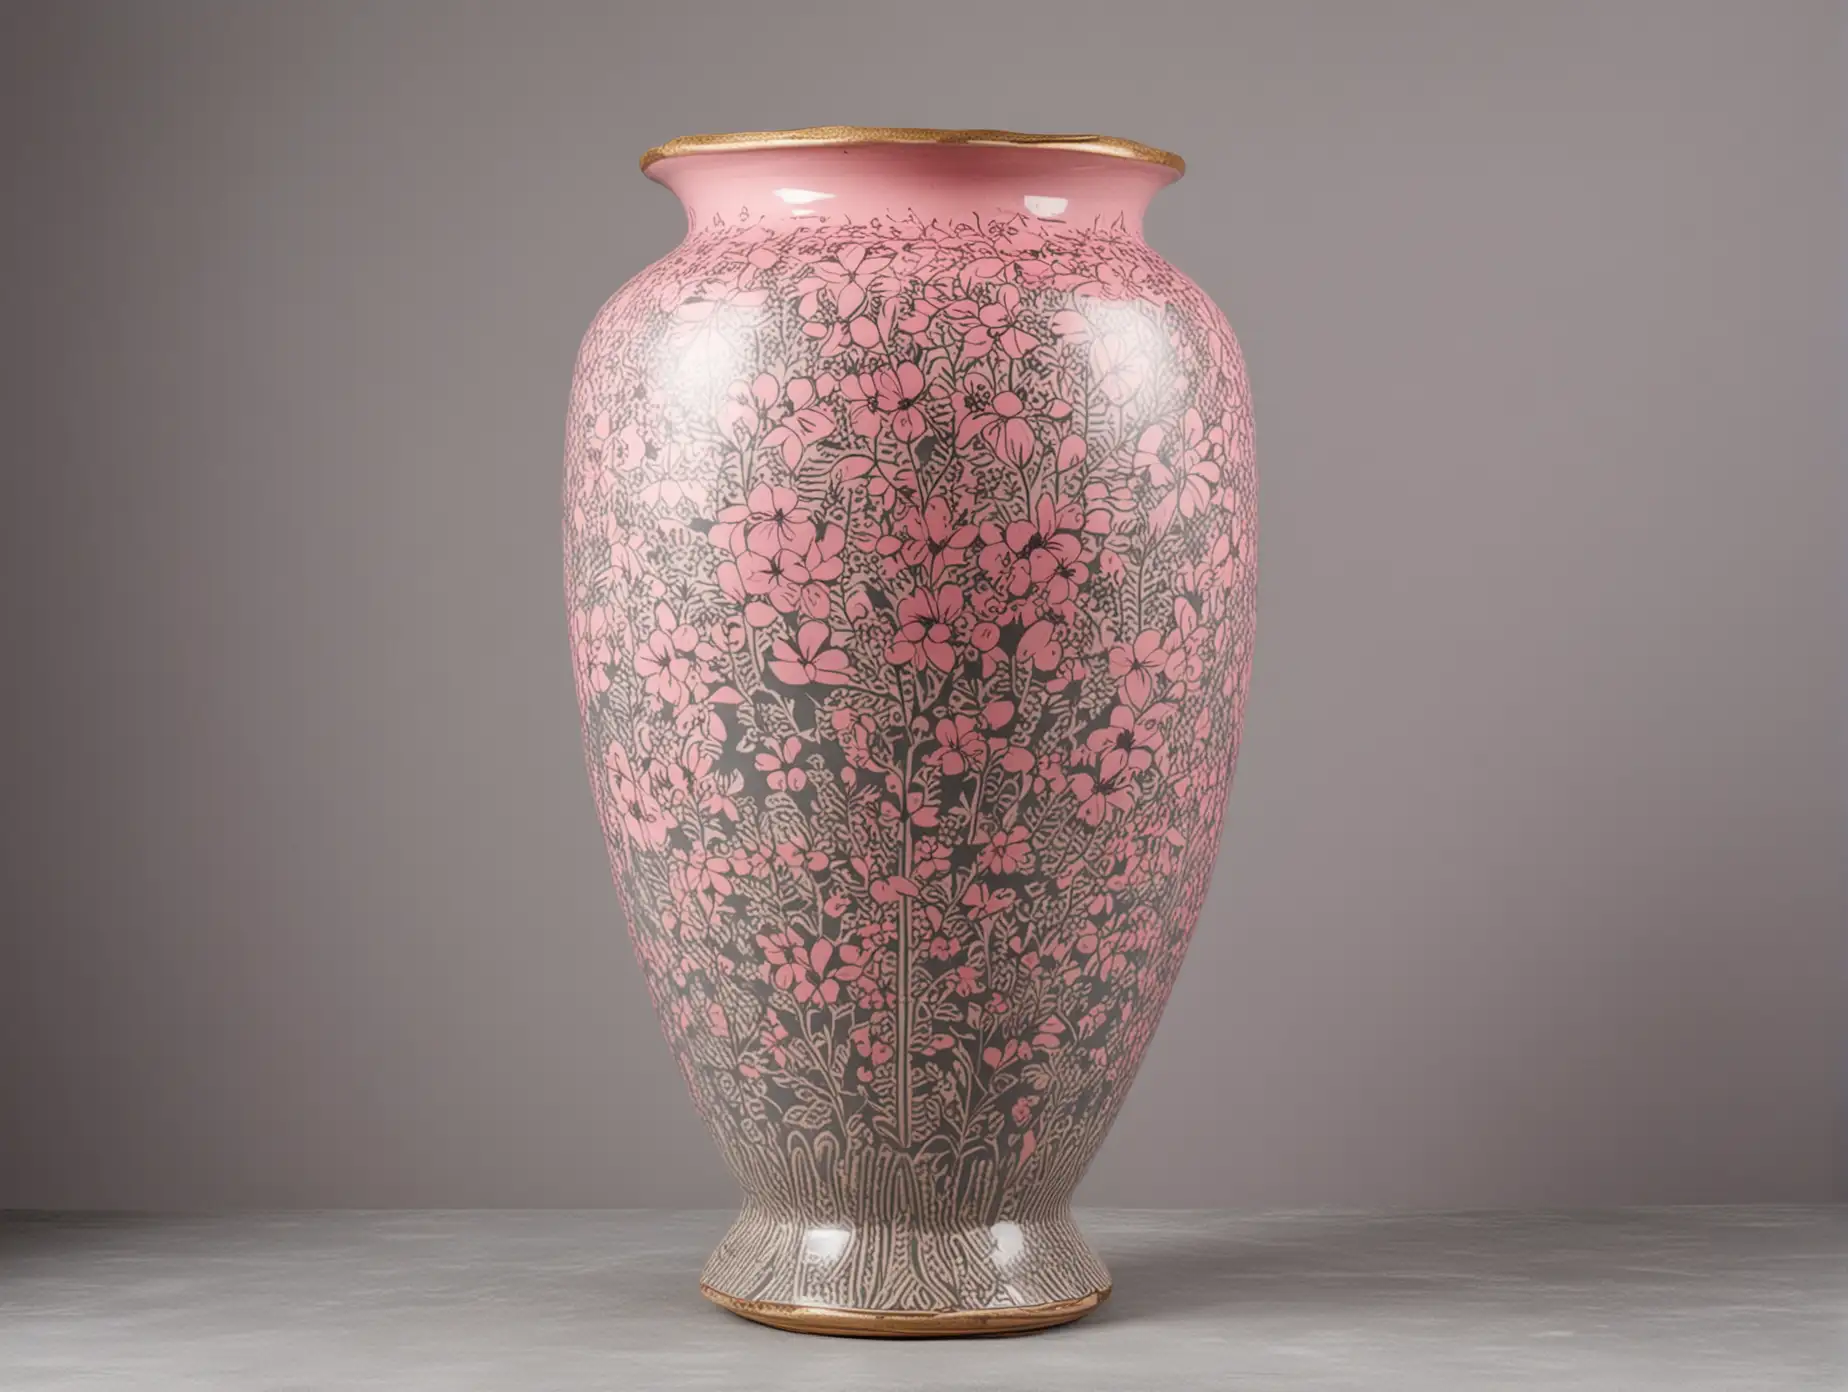 giant vase with delicate pink designs on it on a pedestal with grey background